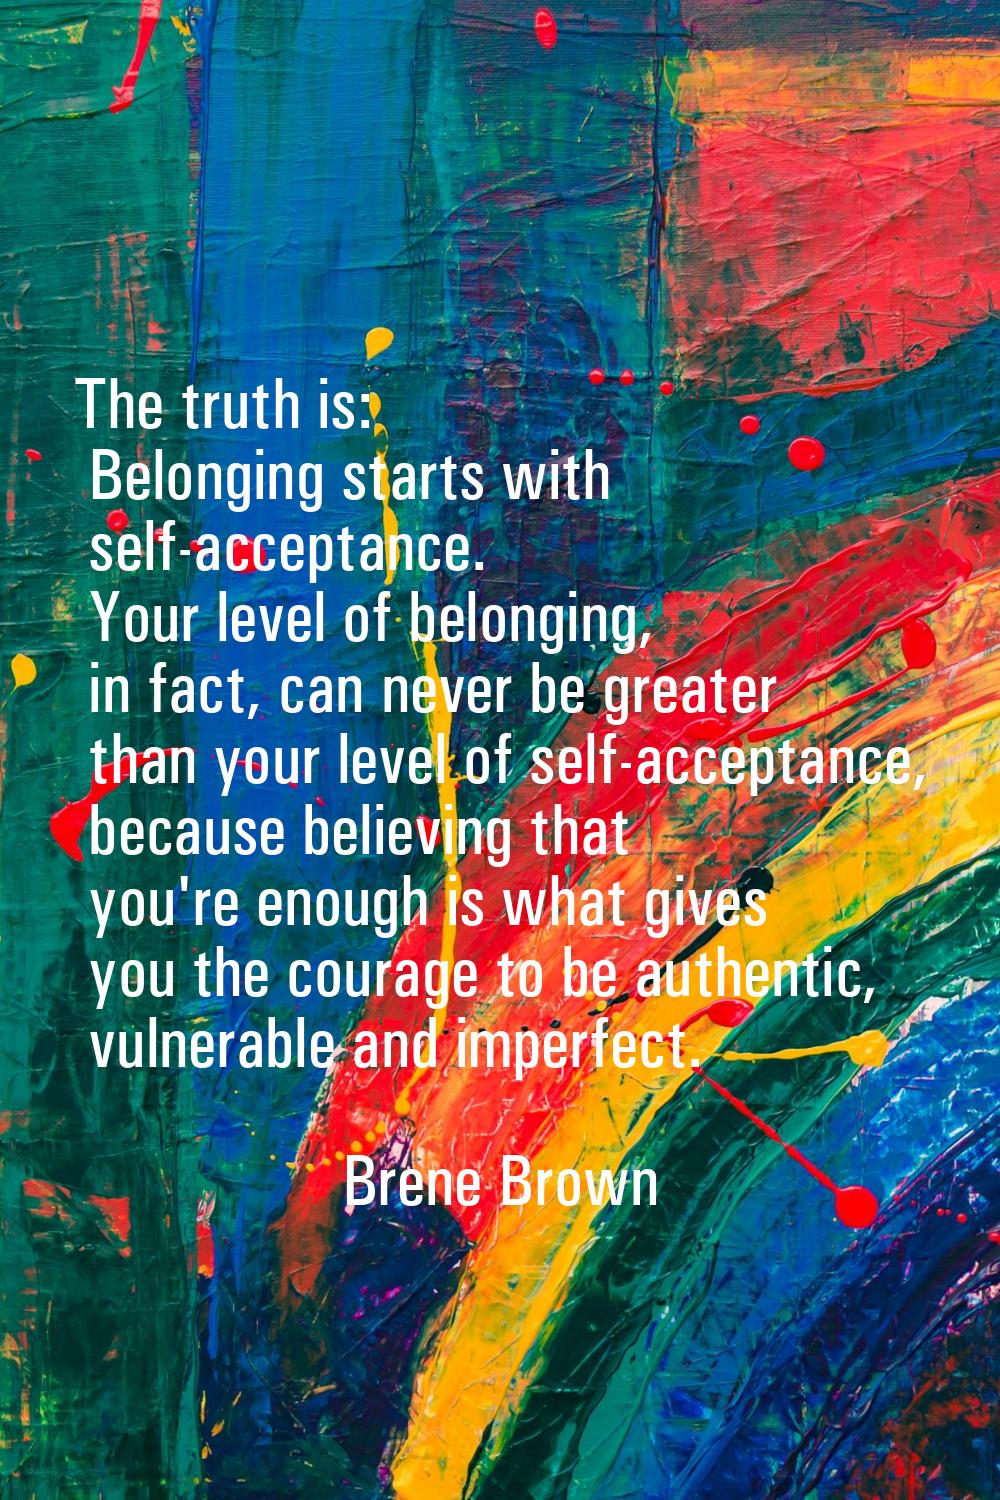 The truth is: Belonging starts with self-acceptance. Your level of belonging, in fact, can never be